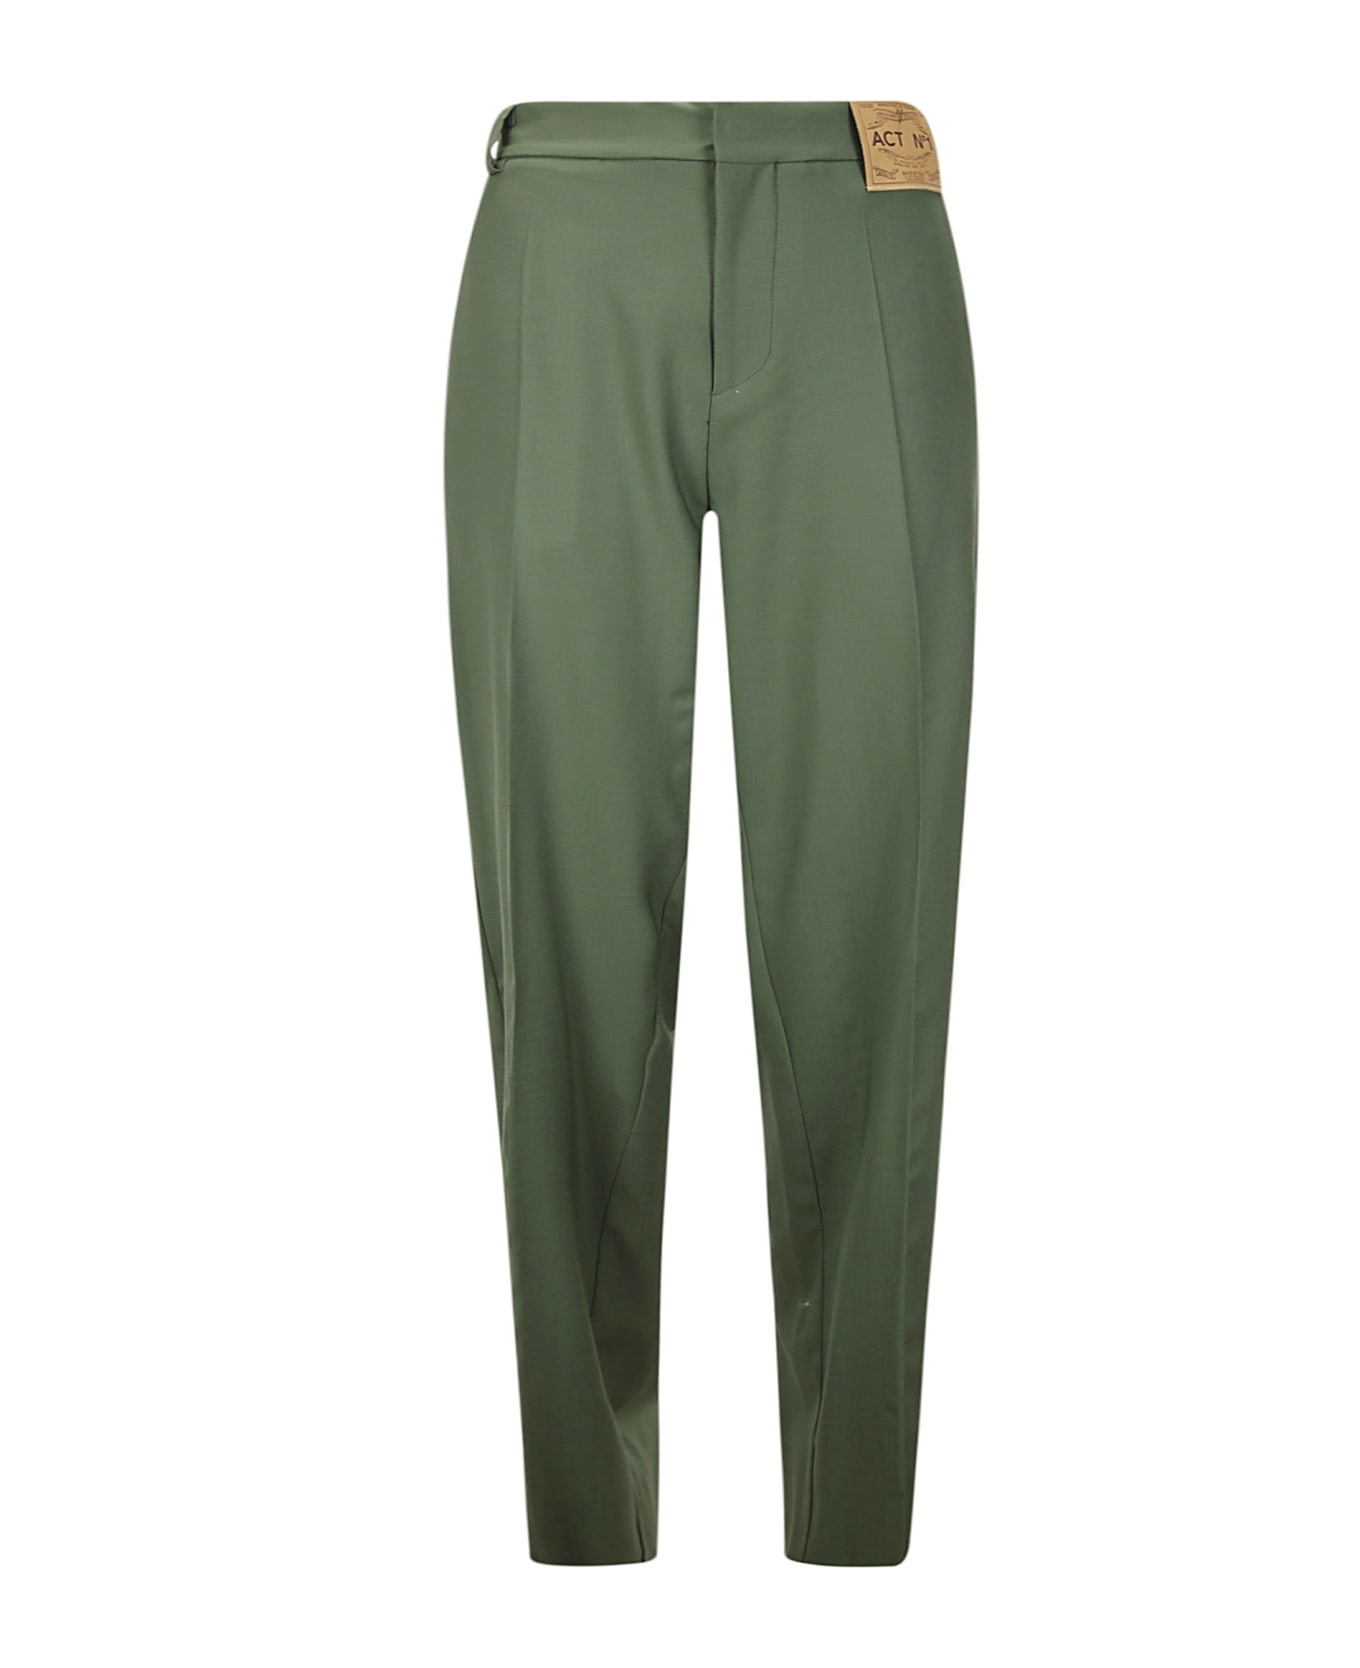 Act n.1 Straight Leg Wool Pants - FOREST